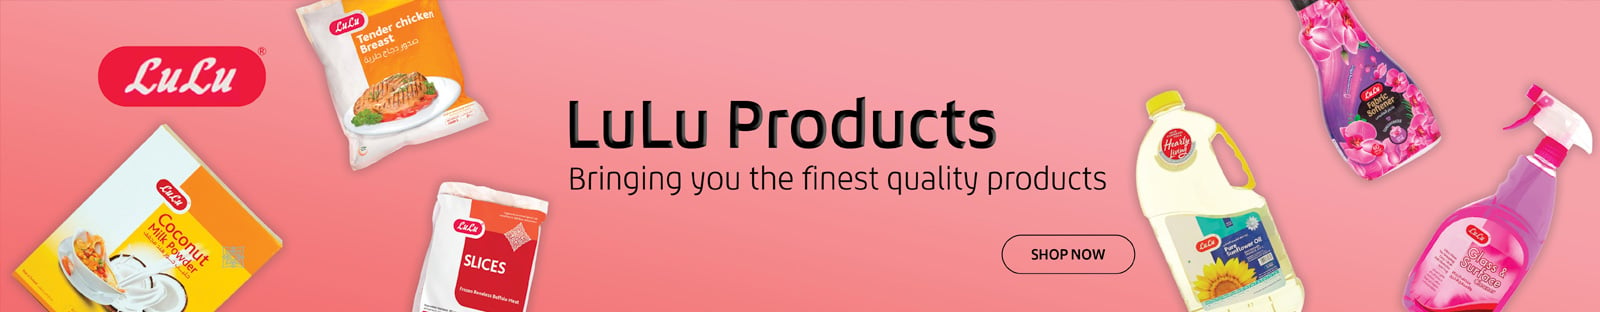 Lulu Products. page